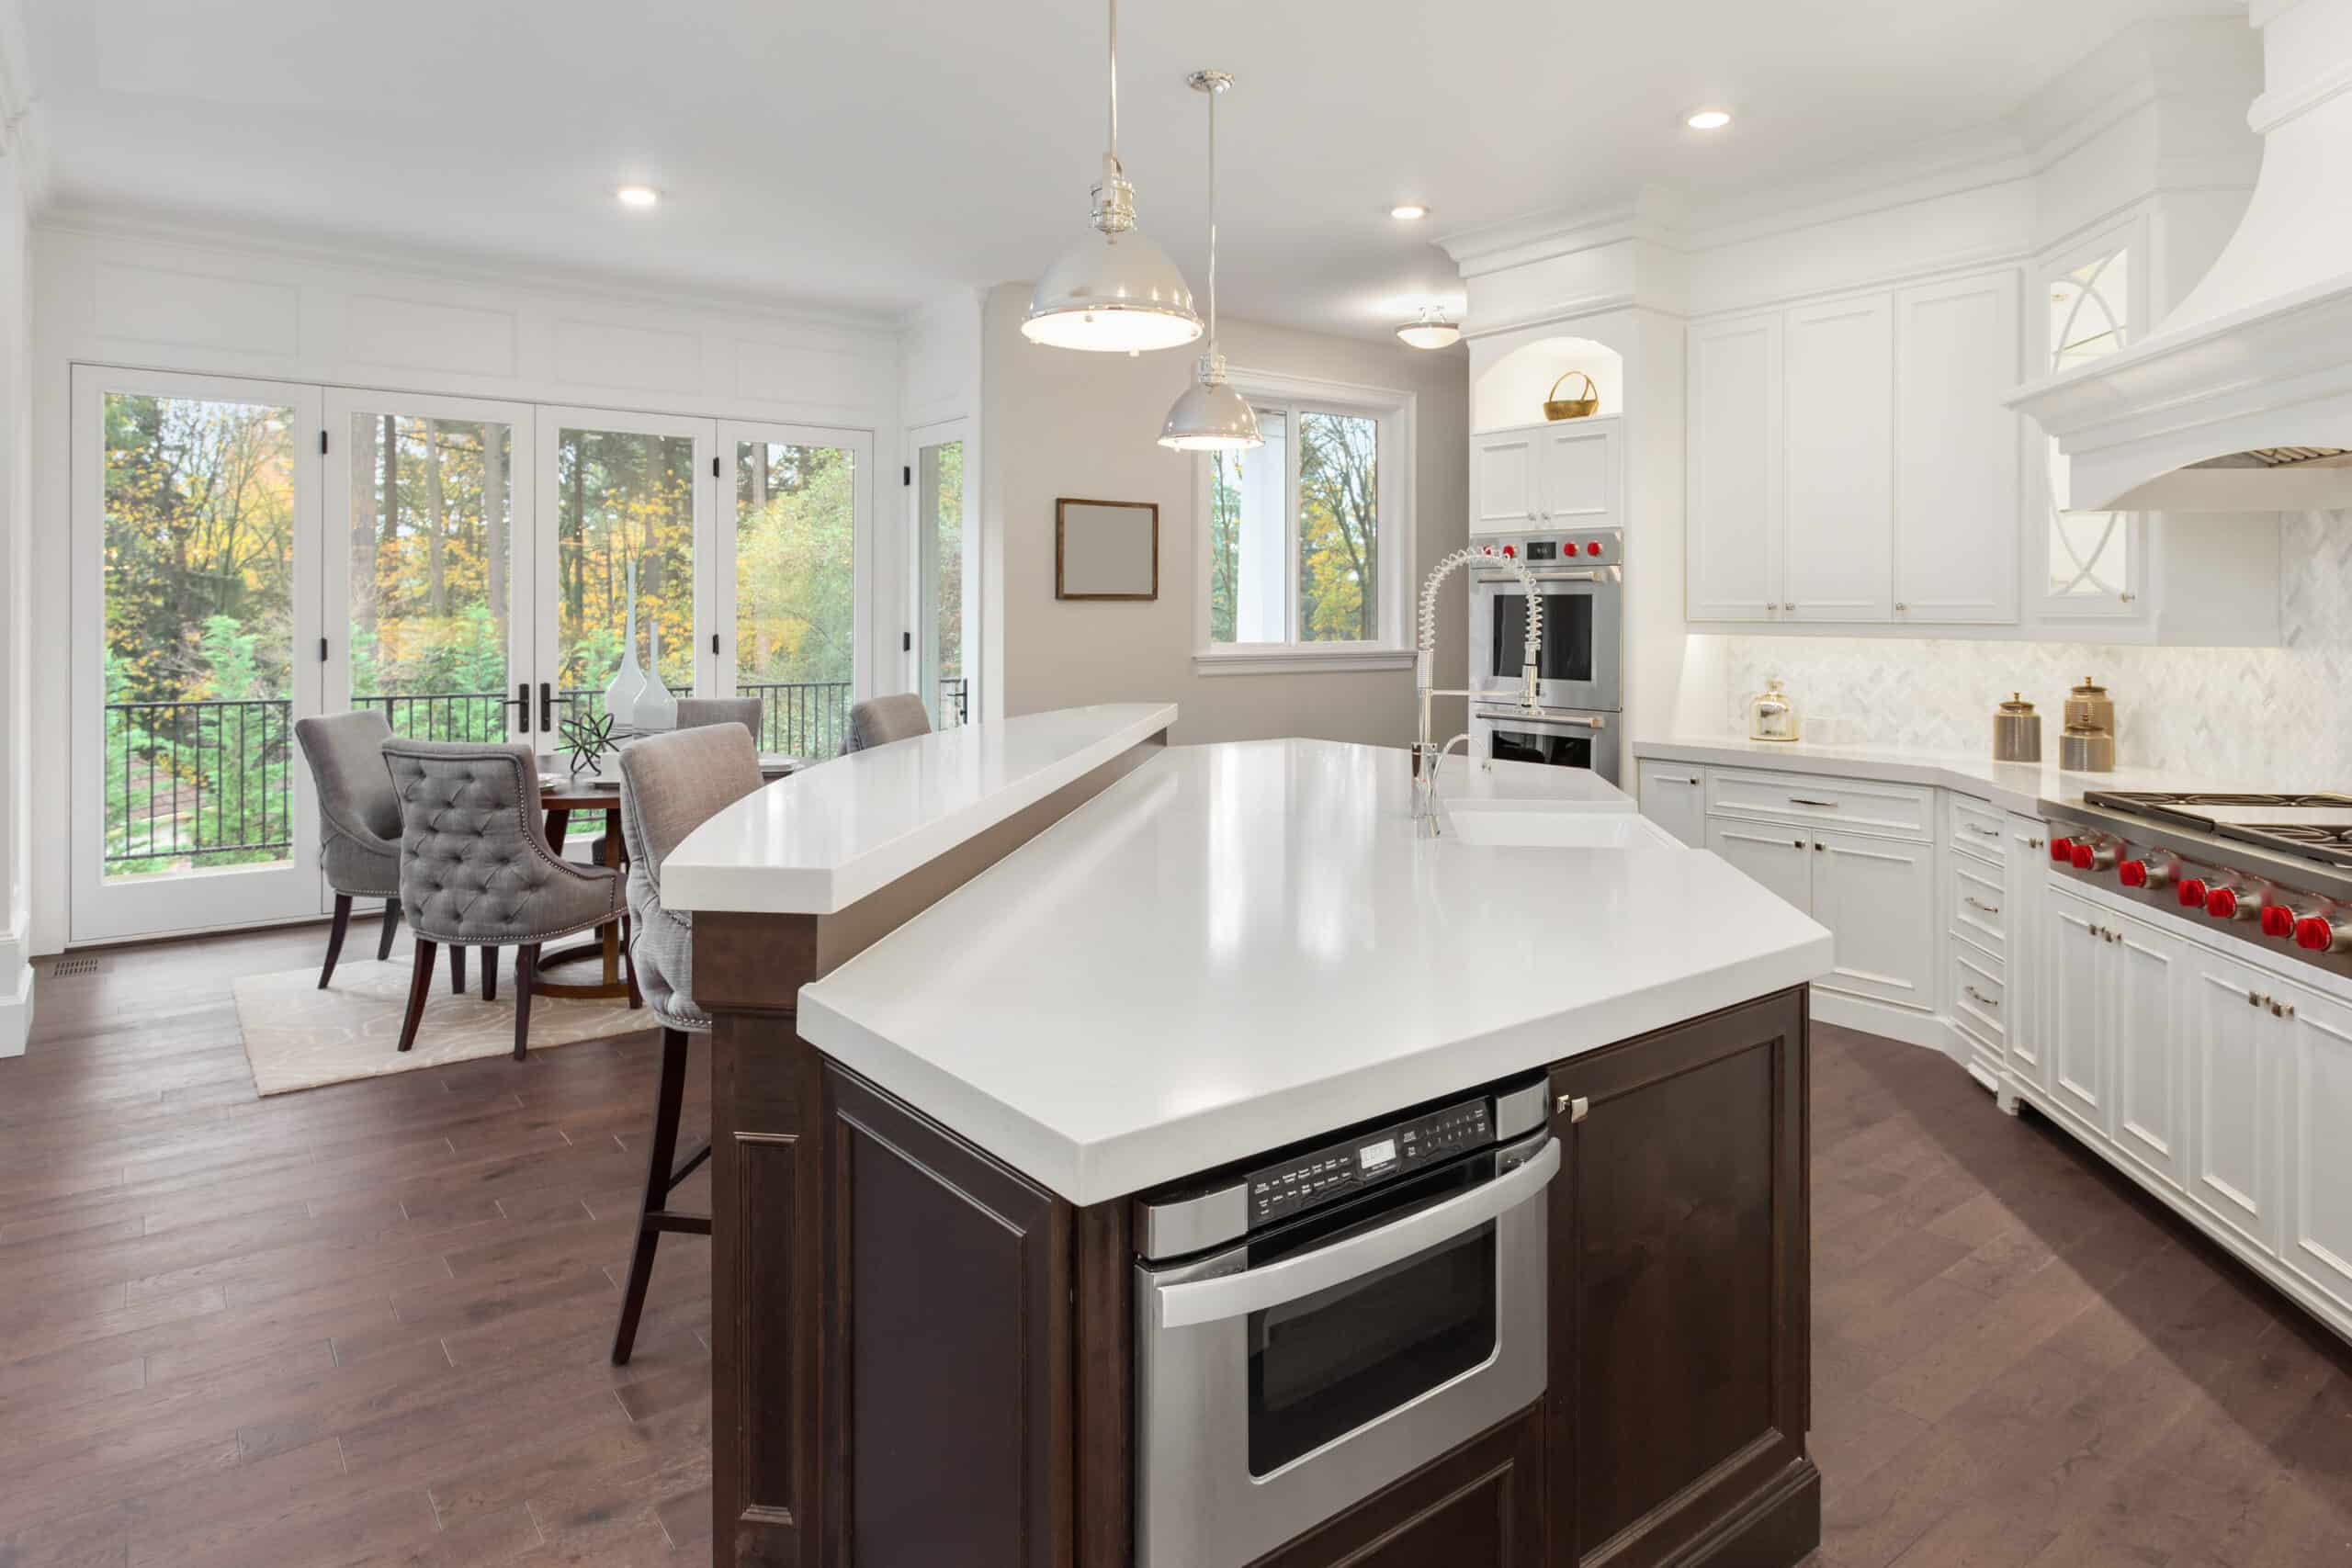 Beautiful kitchen in new luxury home with hardwood floors, white cabinets, and quartz countertops. Shows eating nook.